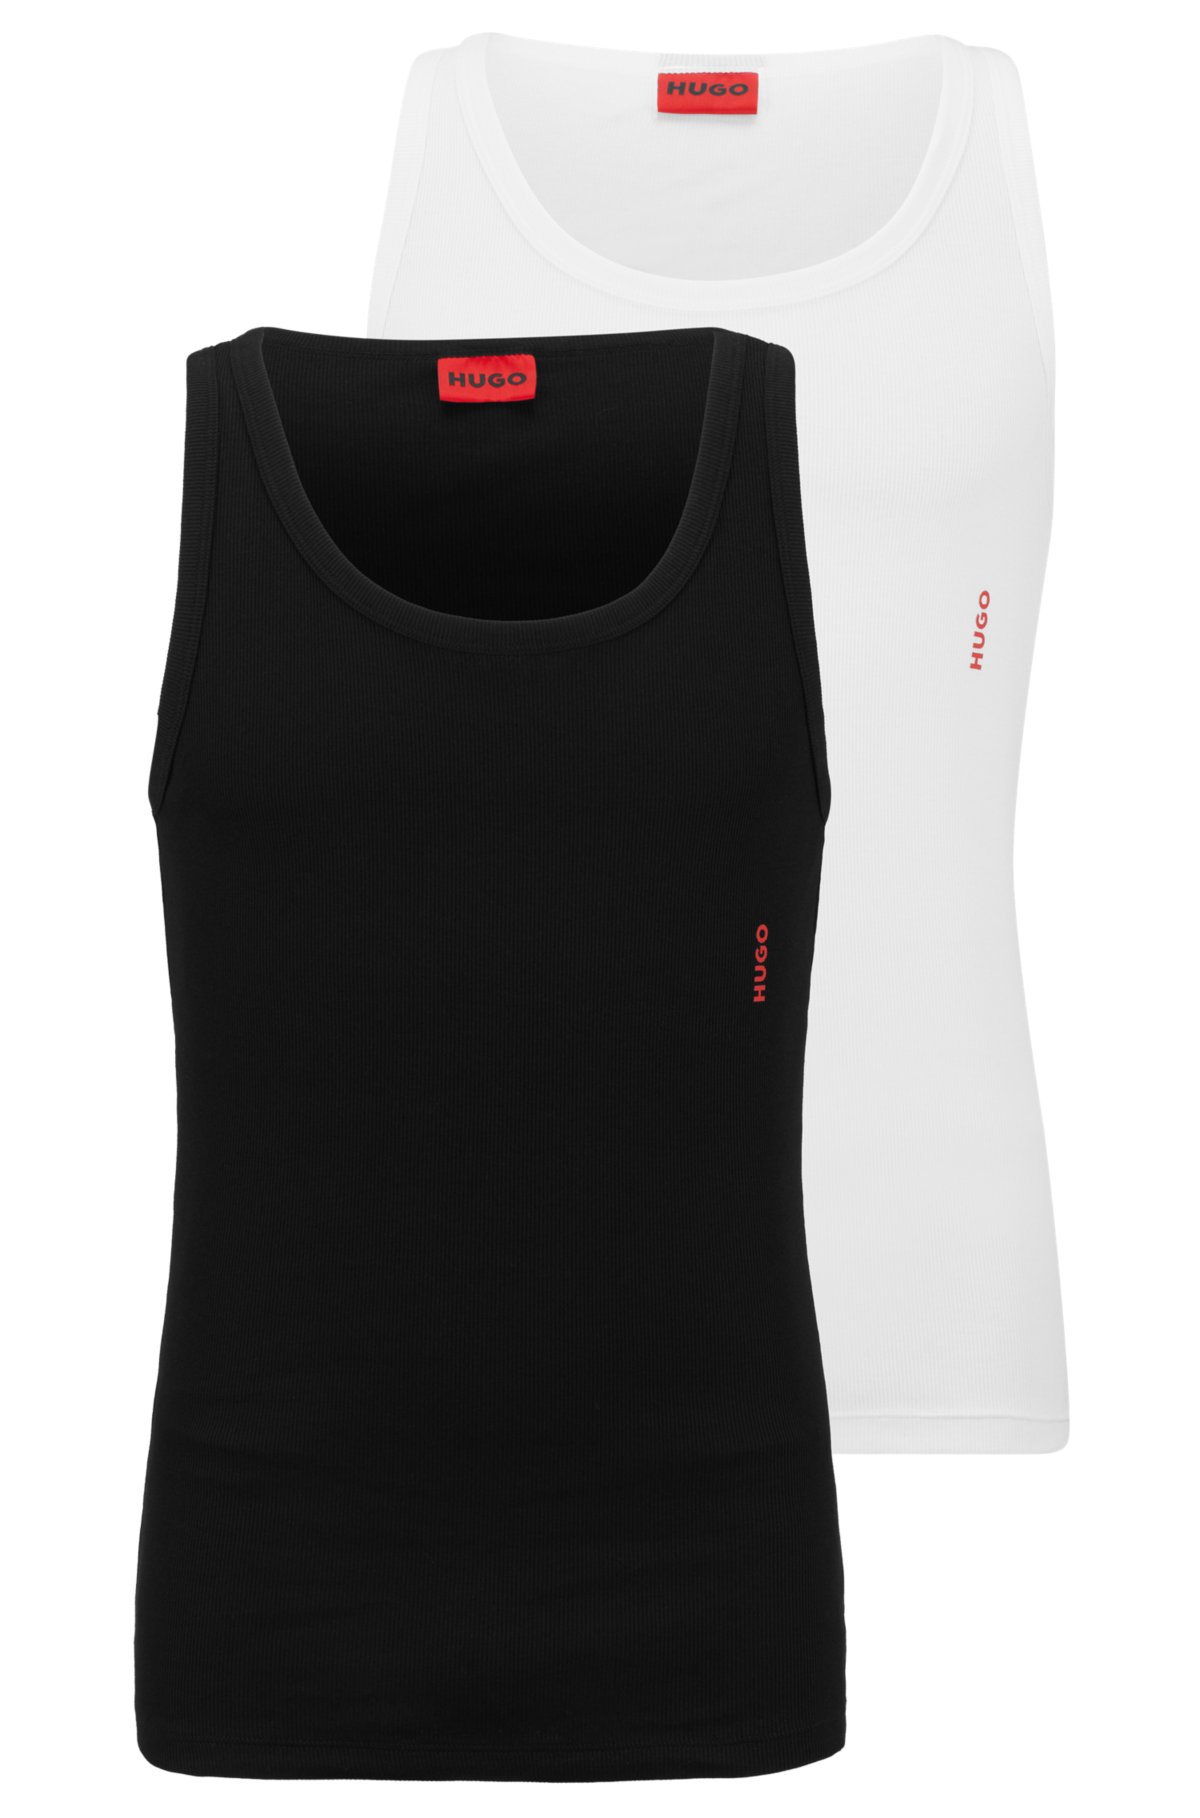 - of stretch-cotton tops with logo Two-pack tank HUGO